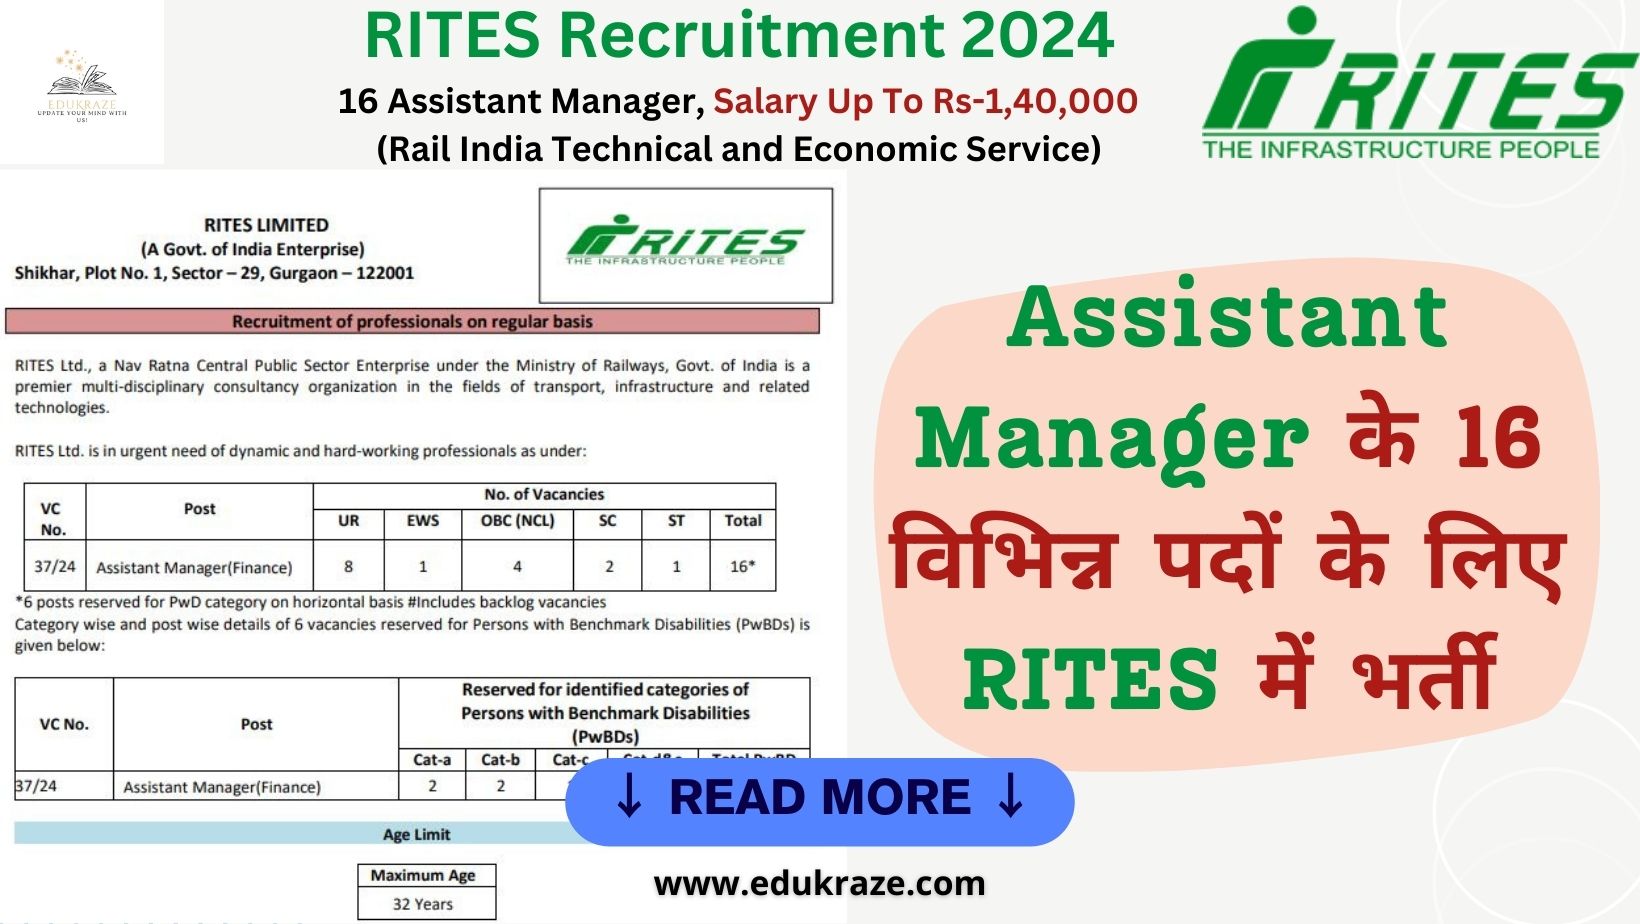 RITES Recruitment 2024 Out For 16 Assistant Manager Vacancies, Salary Up to 1,40,000